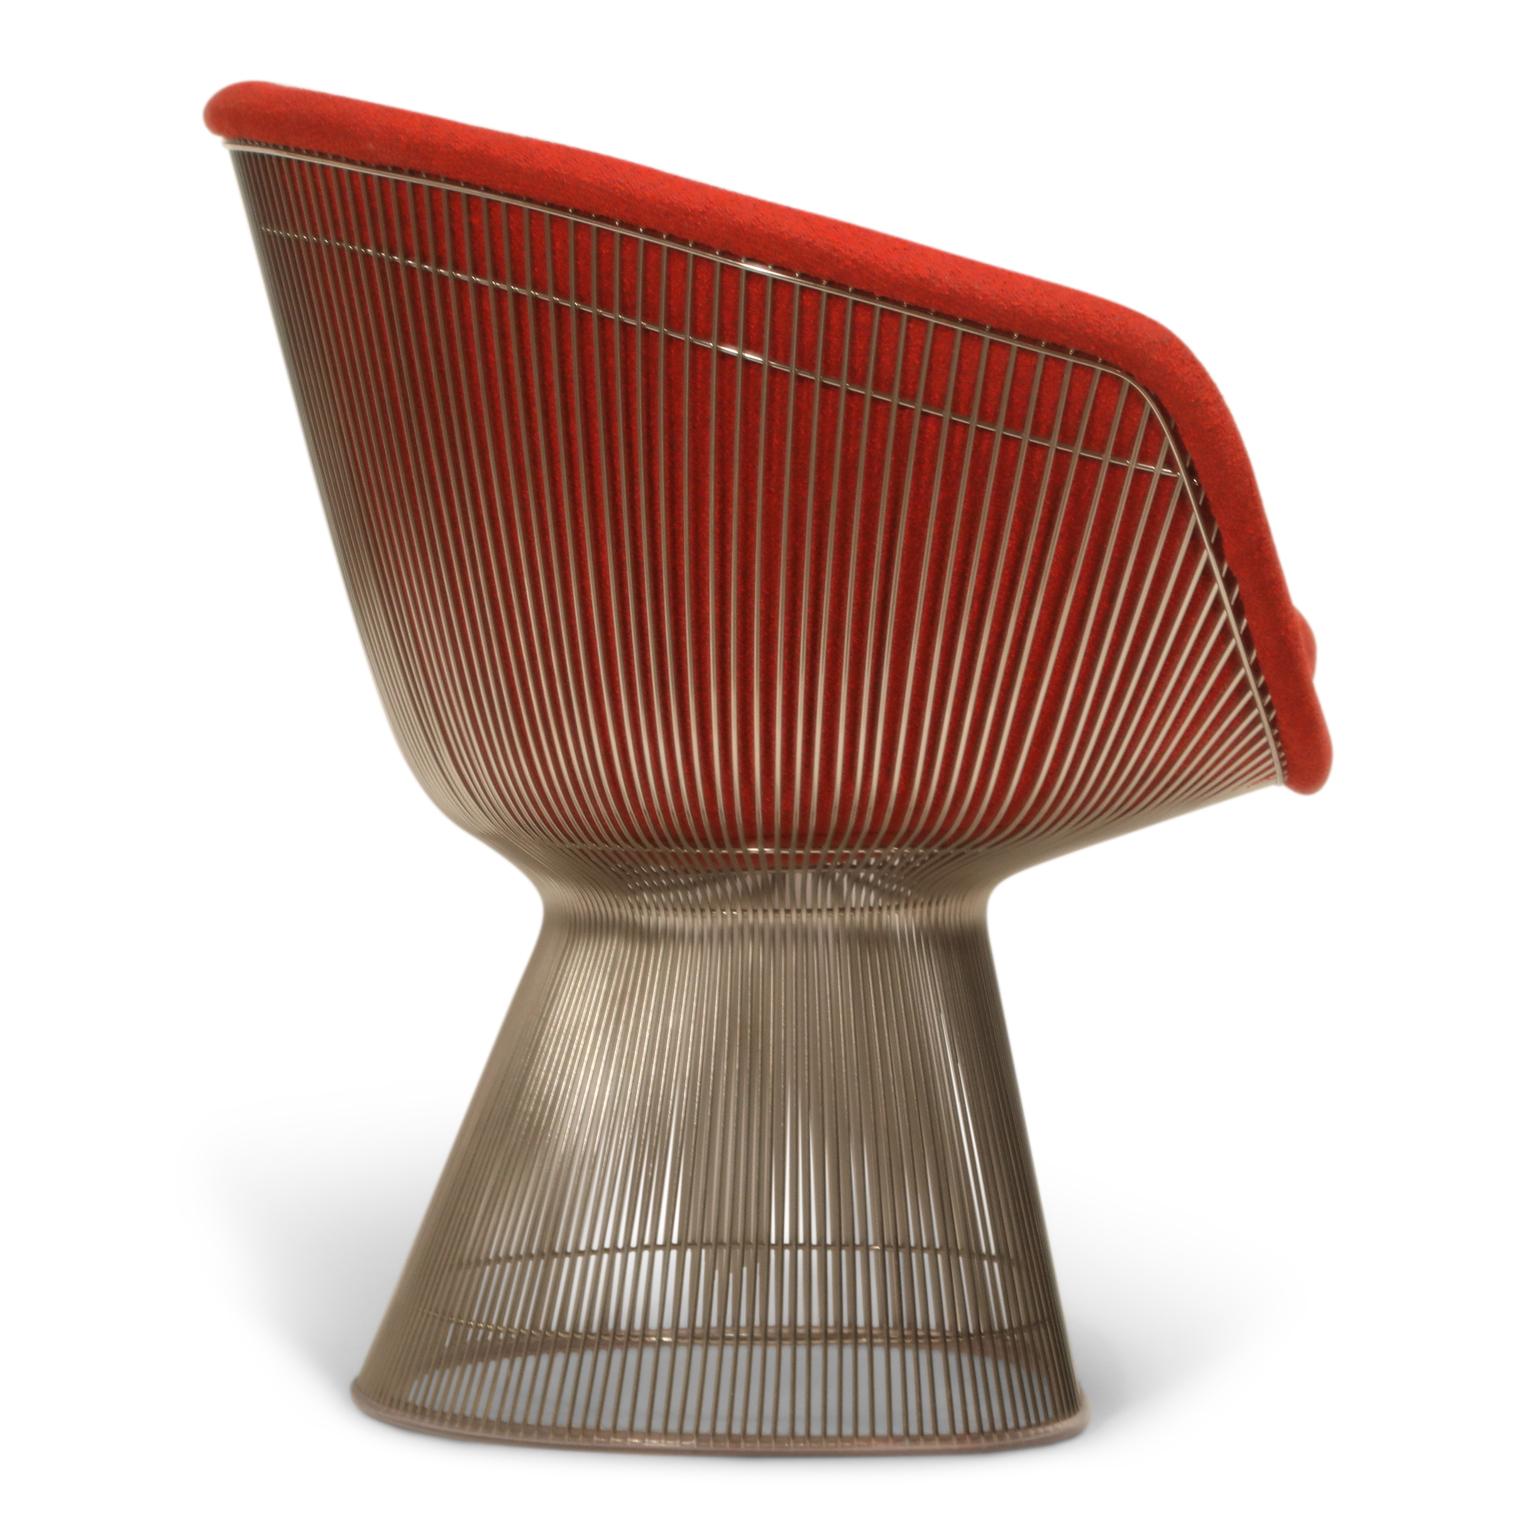 American Warren Platner for Knoll Lounge Chairs in Red Wool Boucle, Near Mint Set of Four